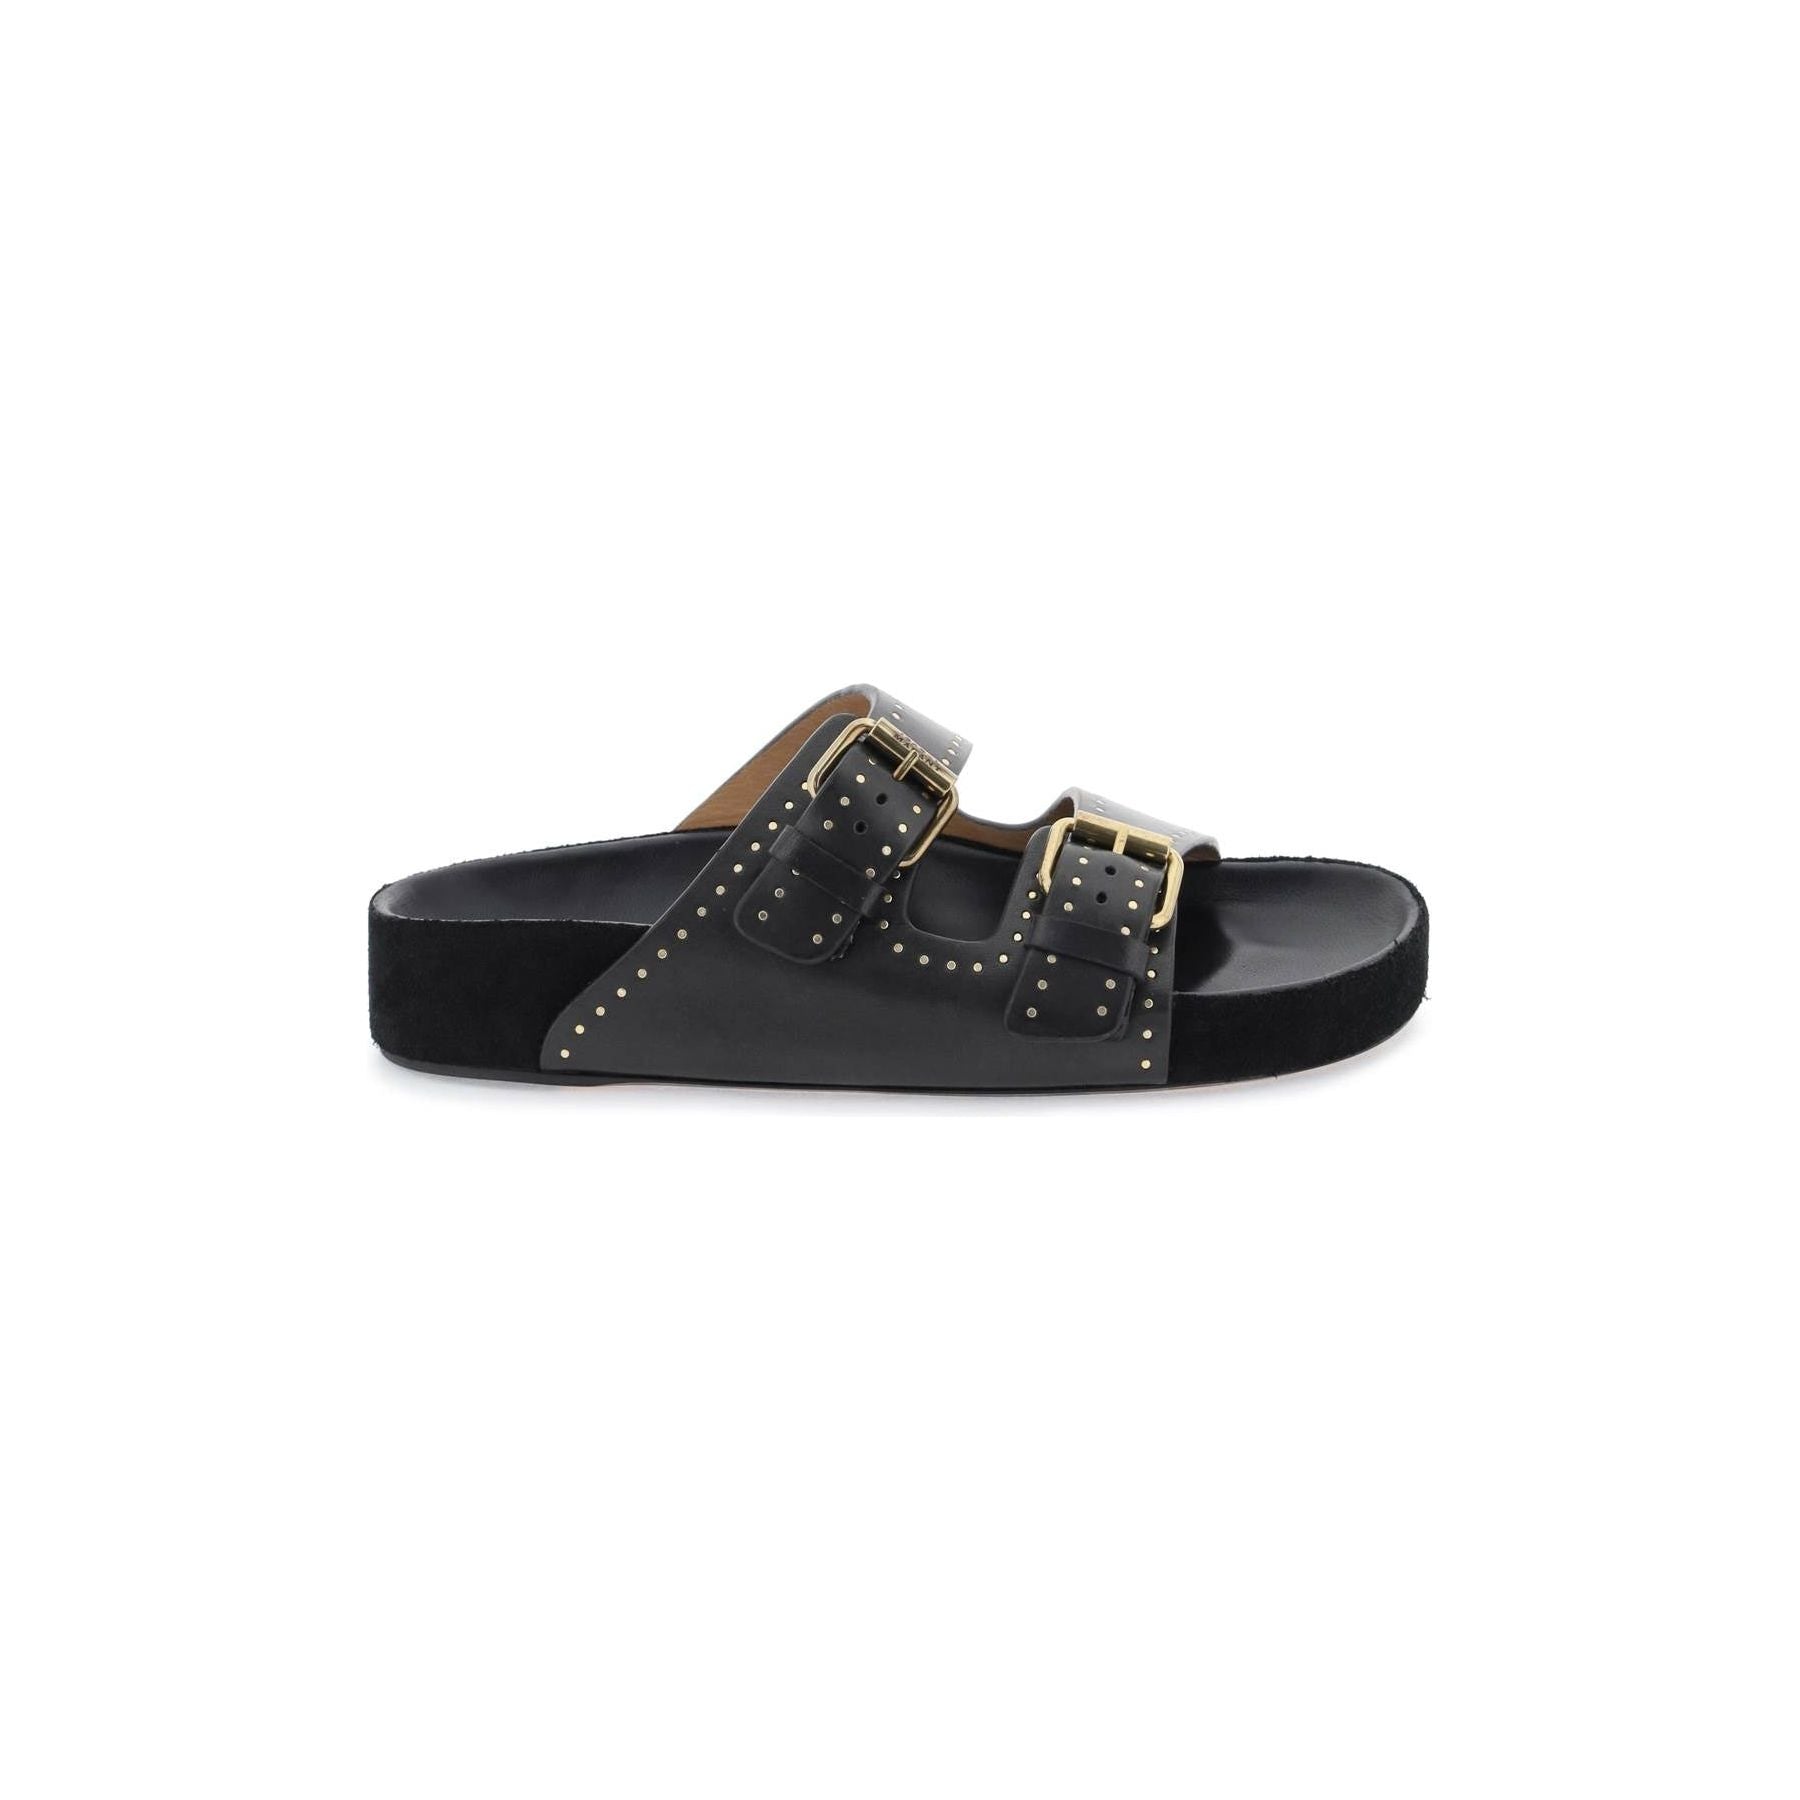 Lennyo Open-Toed Leather Sandals